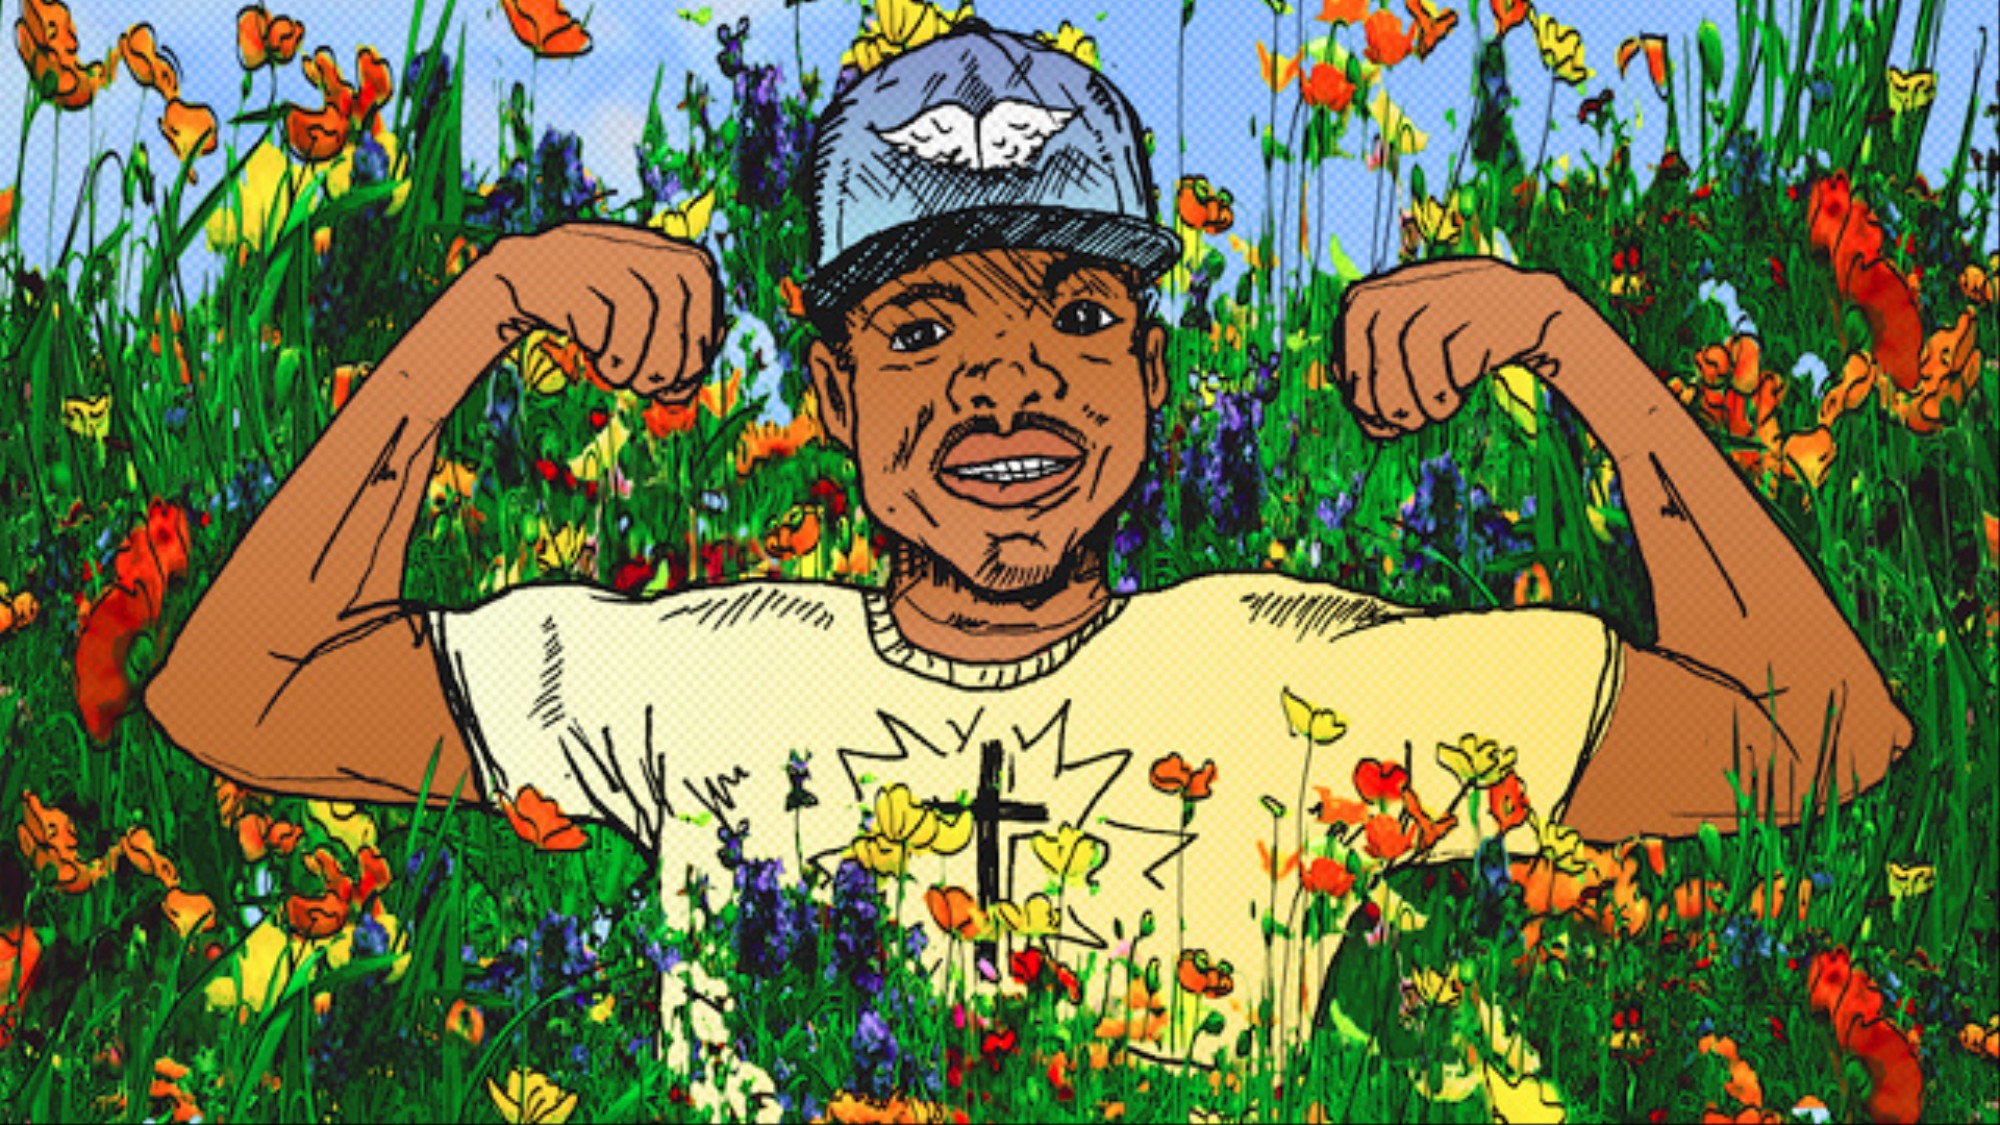 Download Chance The Rapper Coloring Book Samples - Kids and Adult Coloring Pages